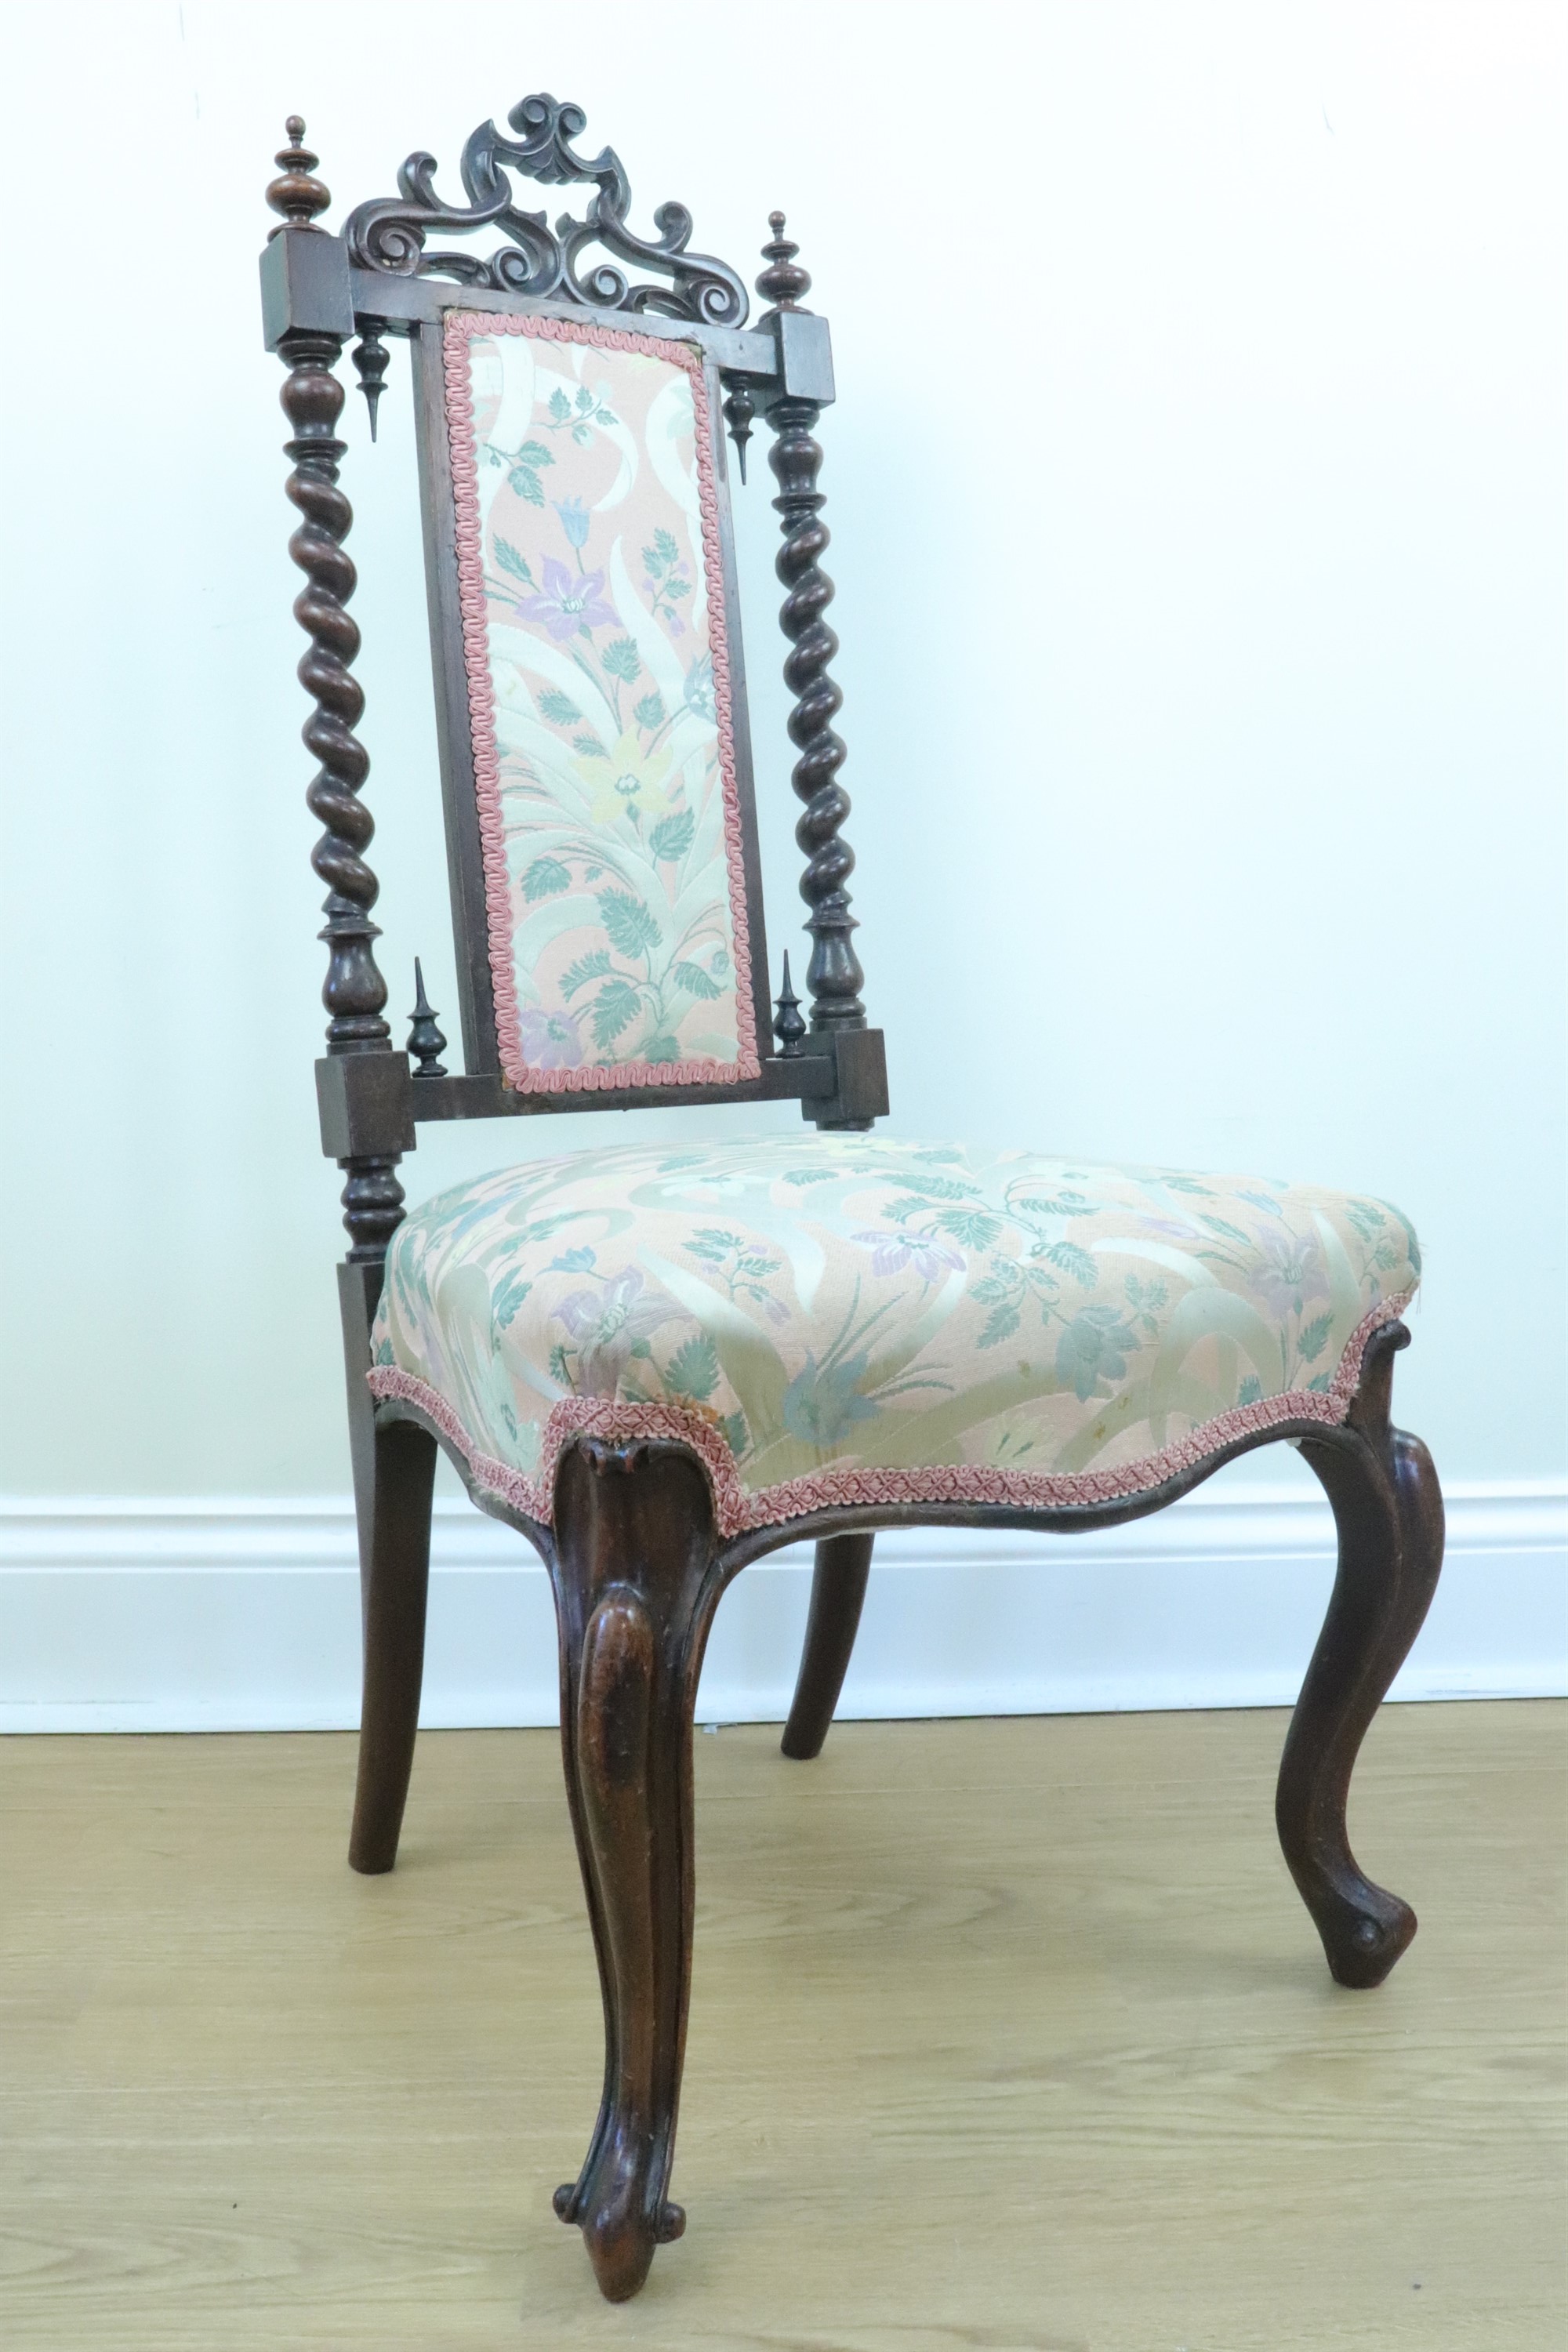 An Victorian carved walnut nursing chair with an adorsed barley twist back crested by a pierced